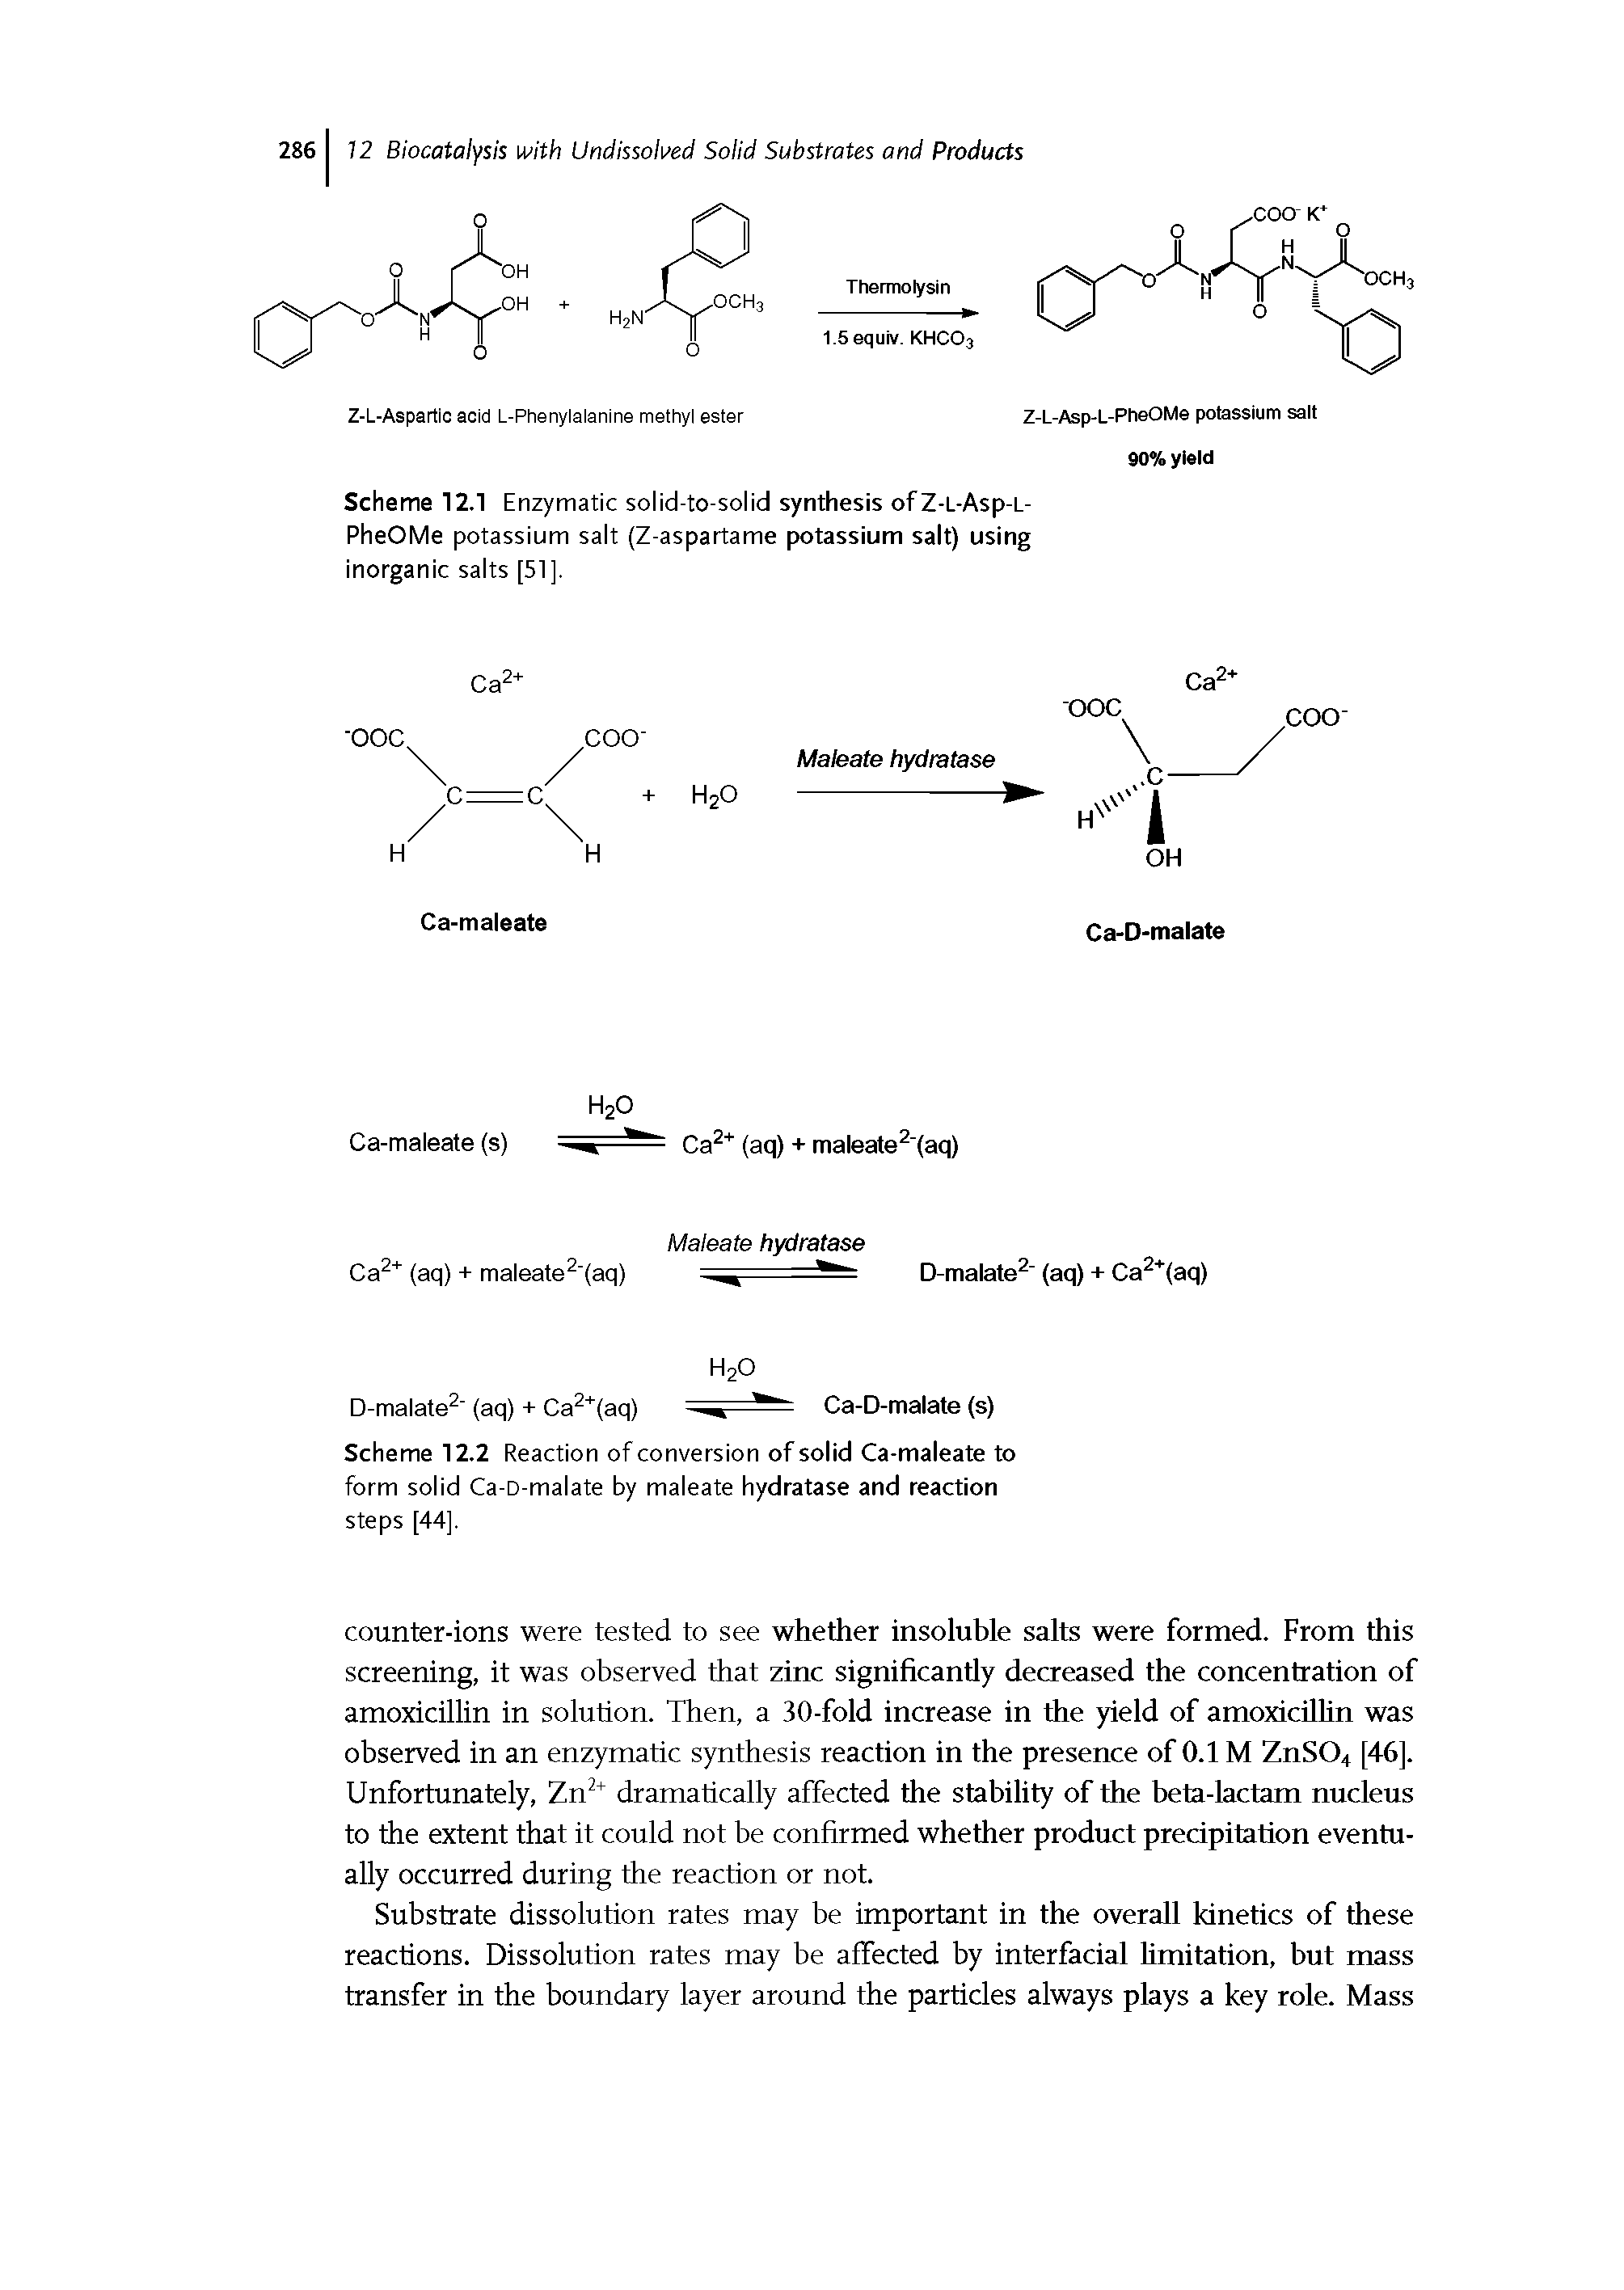 Scheme 12.2 Reaction of conversion of solid Ca-maleate to form solid Ca-D-malate by maleate hydratase and reaction steps [44].